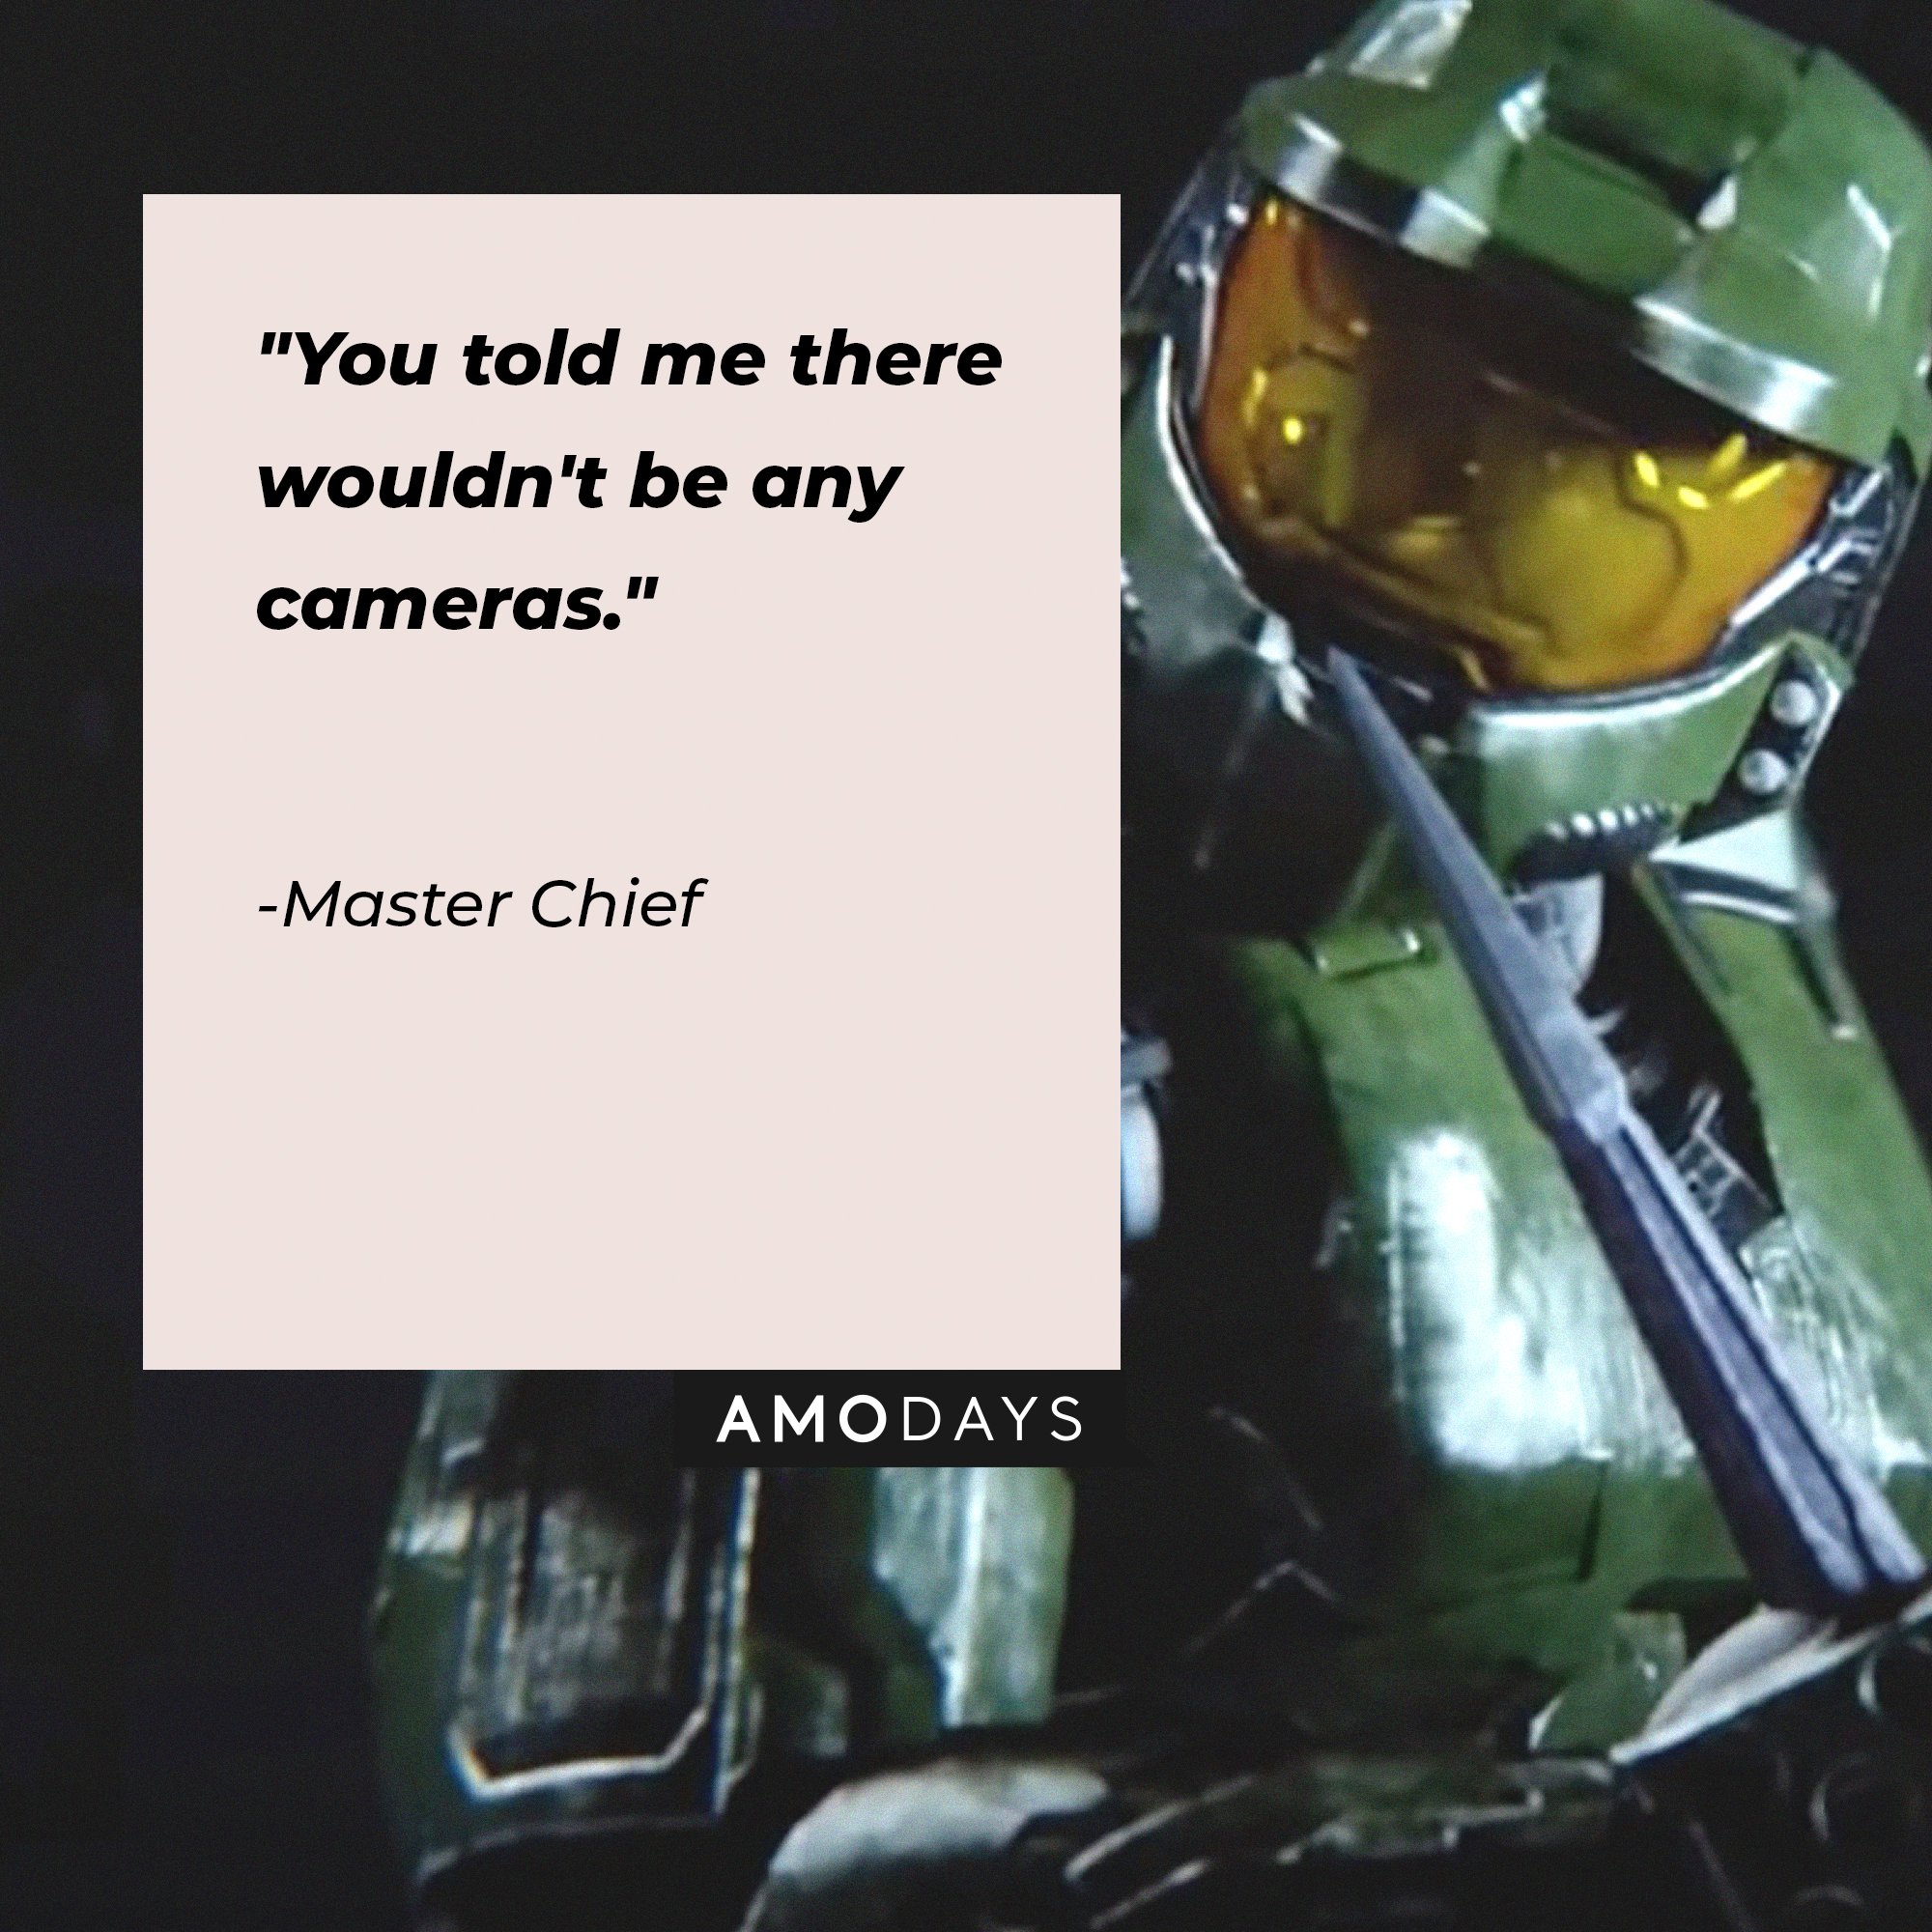 Master Chief's quote: "You told me there wouldn't be any cameras." | Image: AmoDays